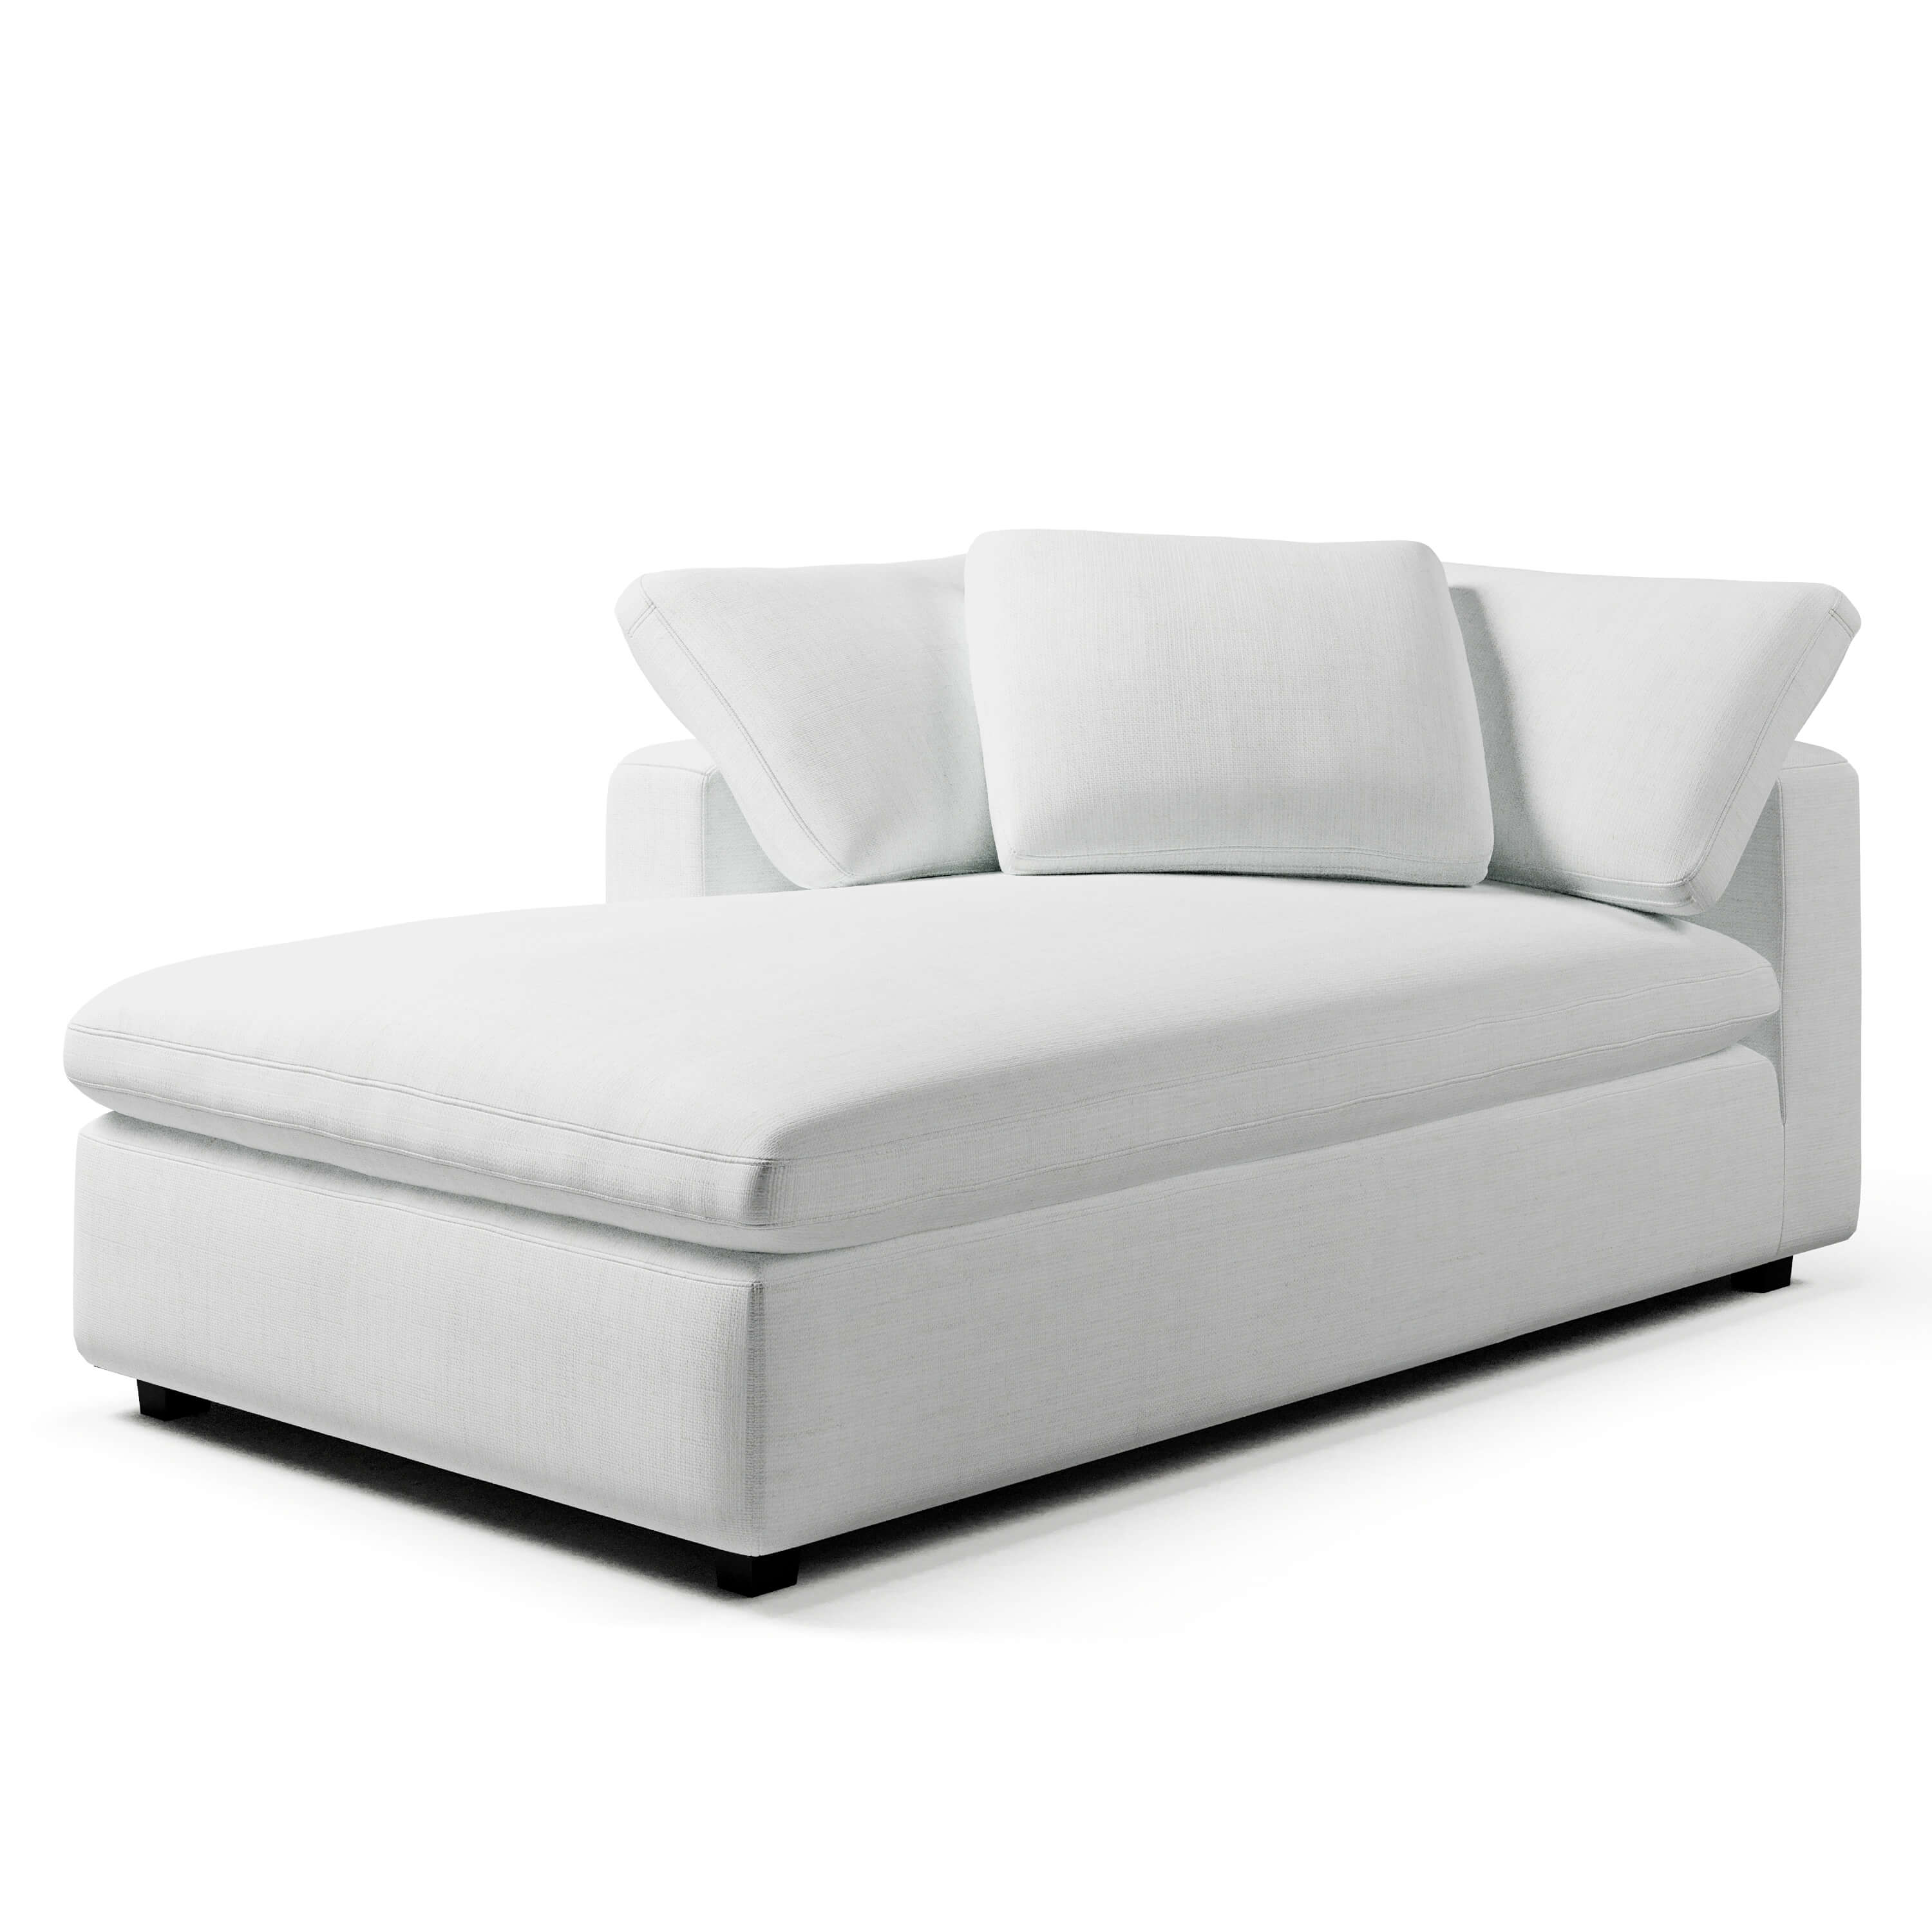 Left Arm Chaise Lounge | White Chaise Lounge | Couch Haus